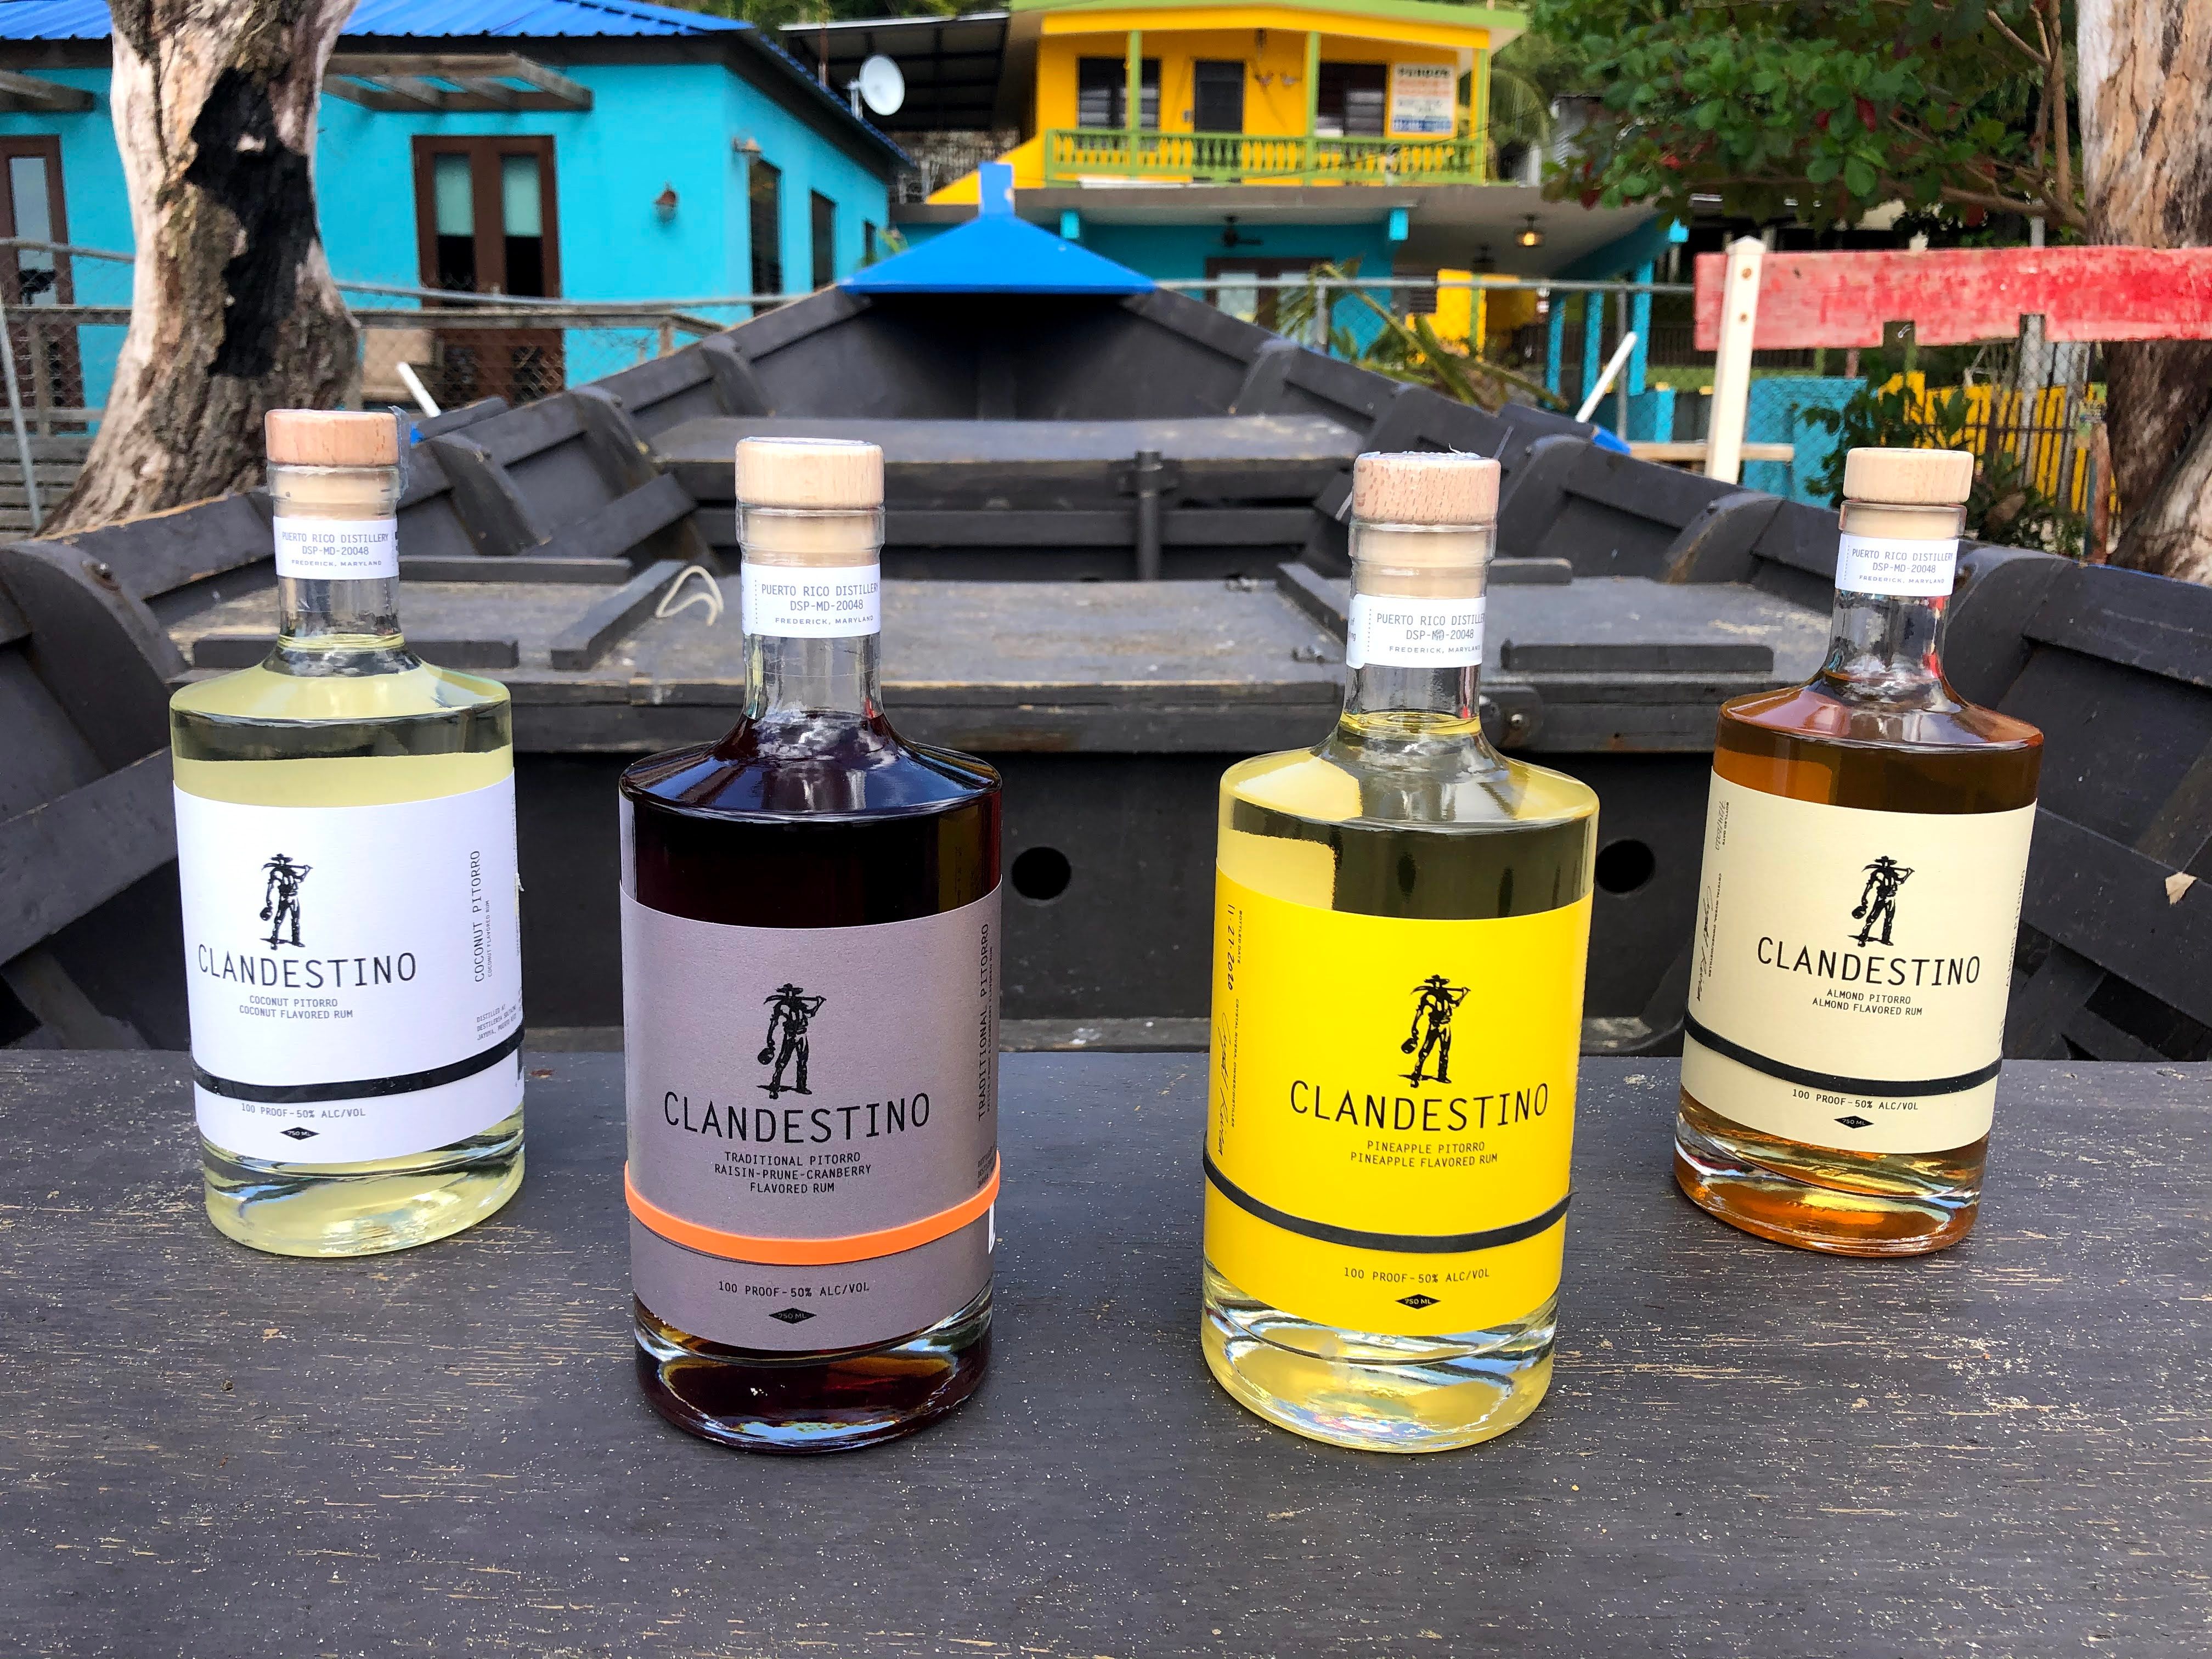 Puerto Rico Distillery makes tropical fruit-flavored pitorro, as well as the traditional type.